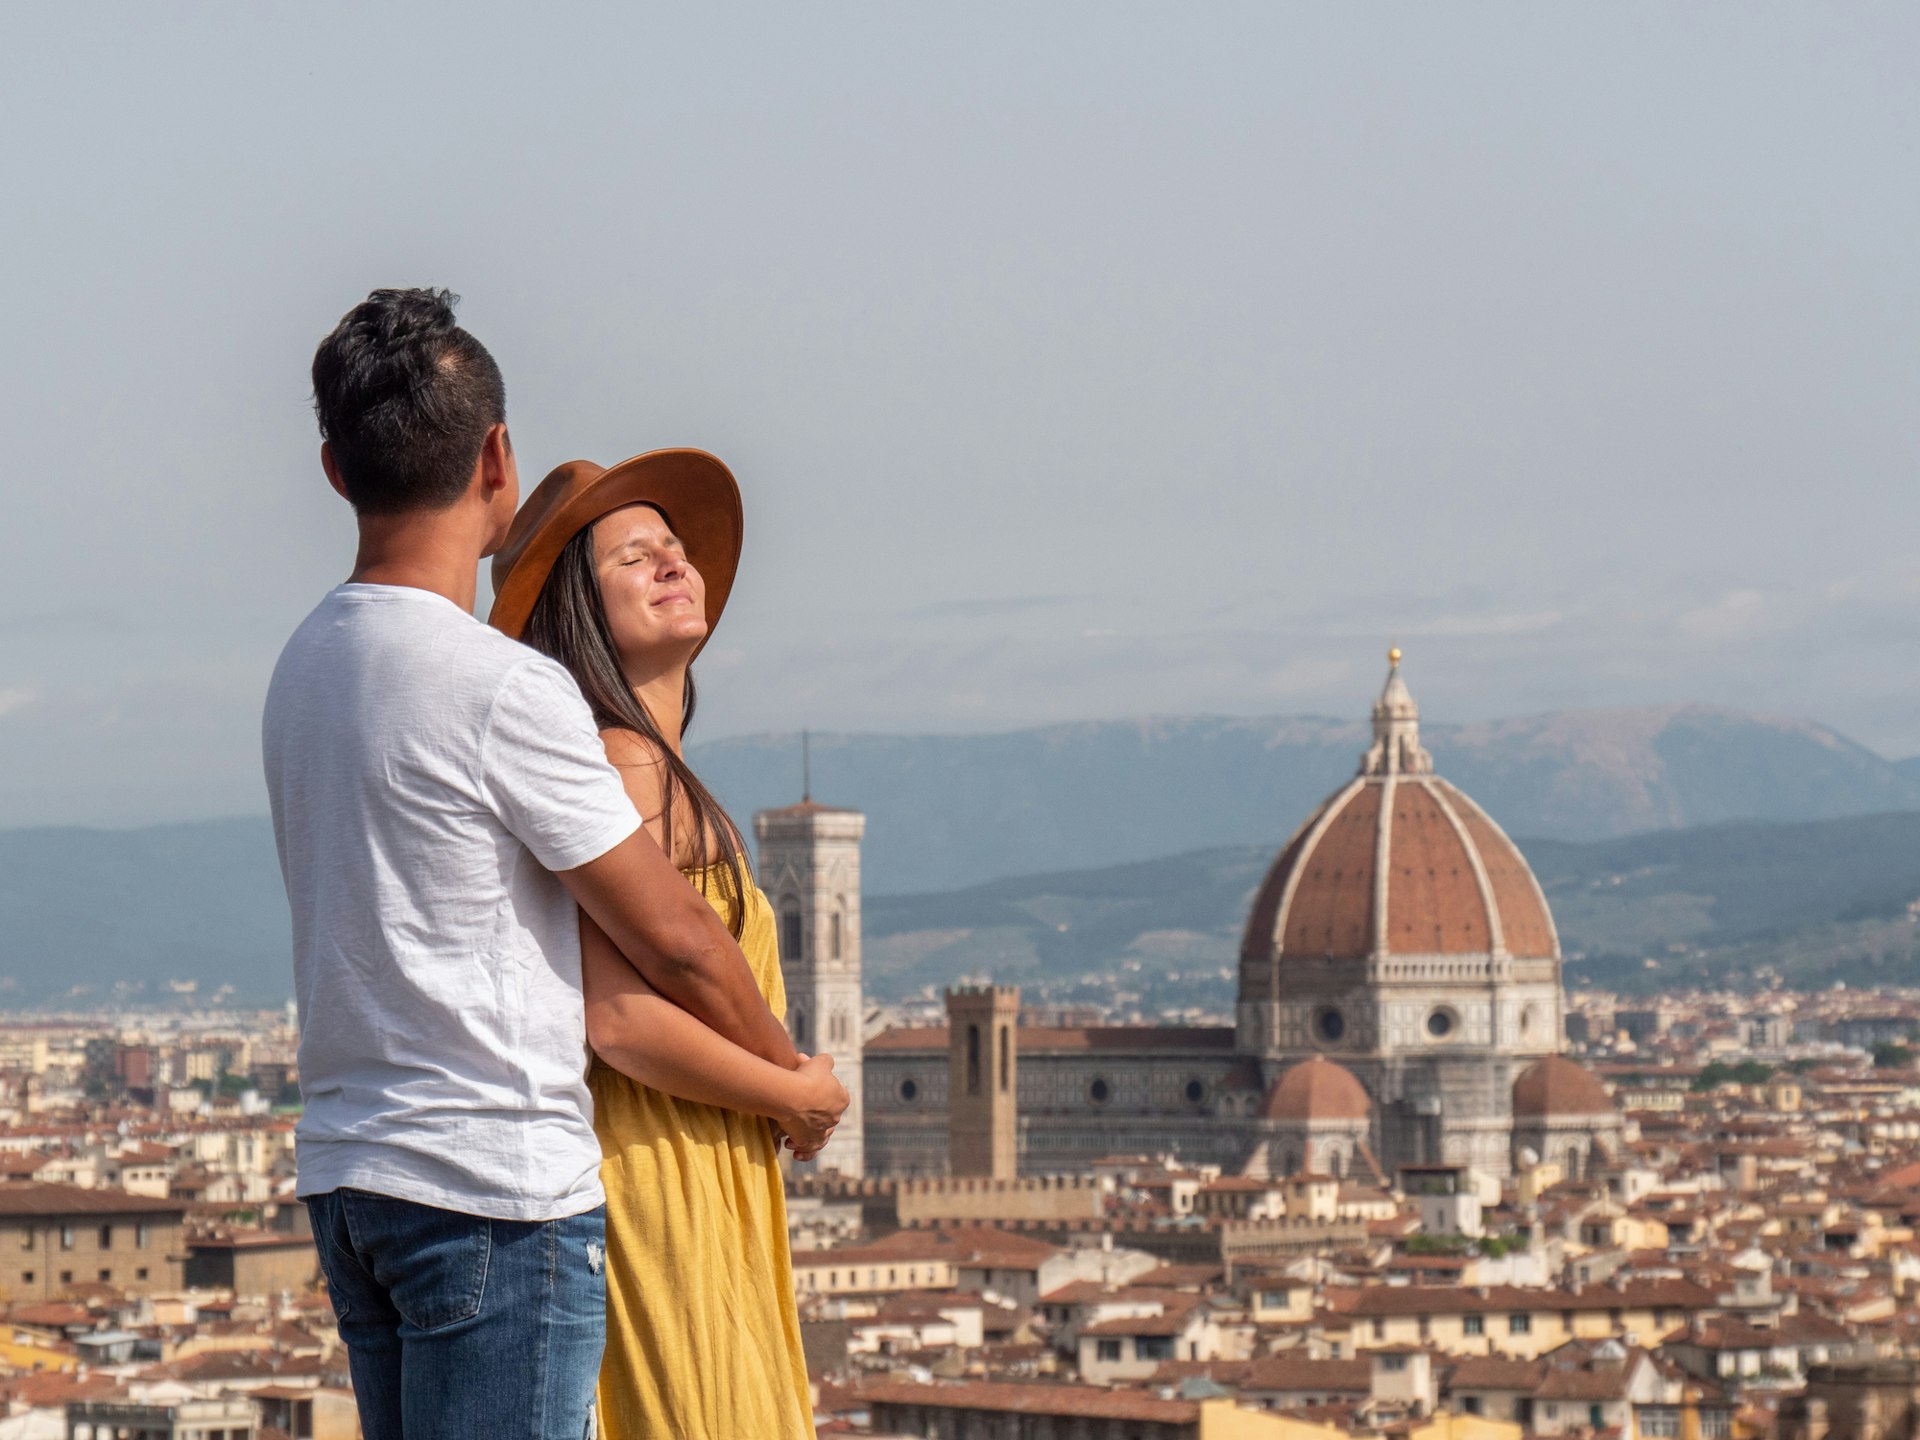 A couple, a white woman and an South Asian man, look out across the rooftops of Florence whilst in a loving embrace